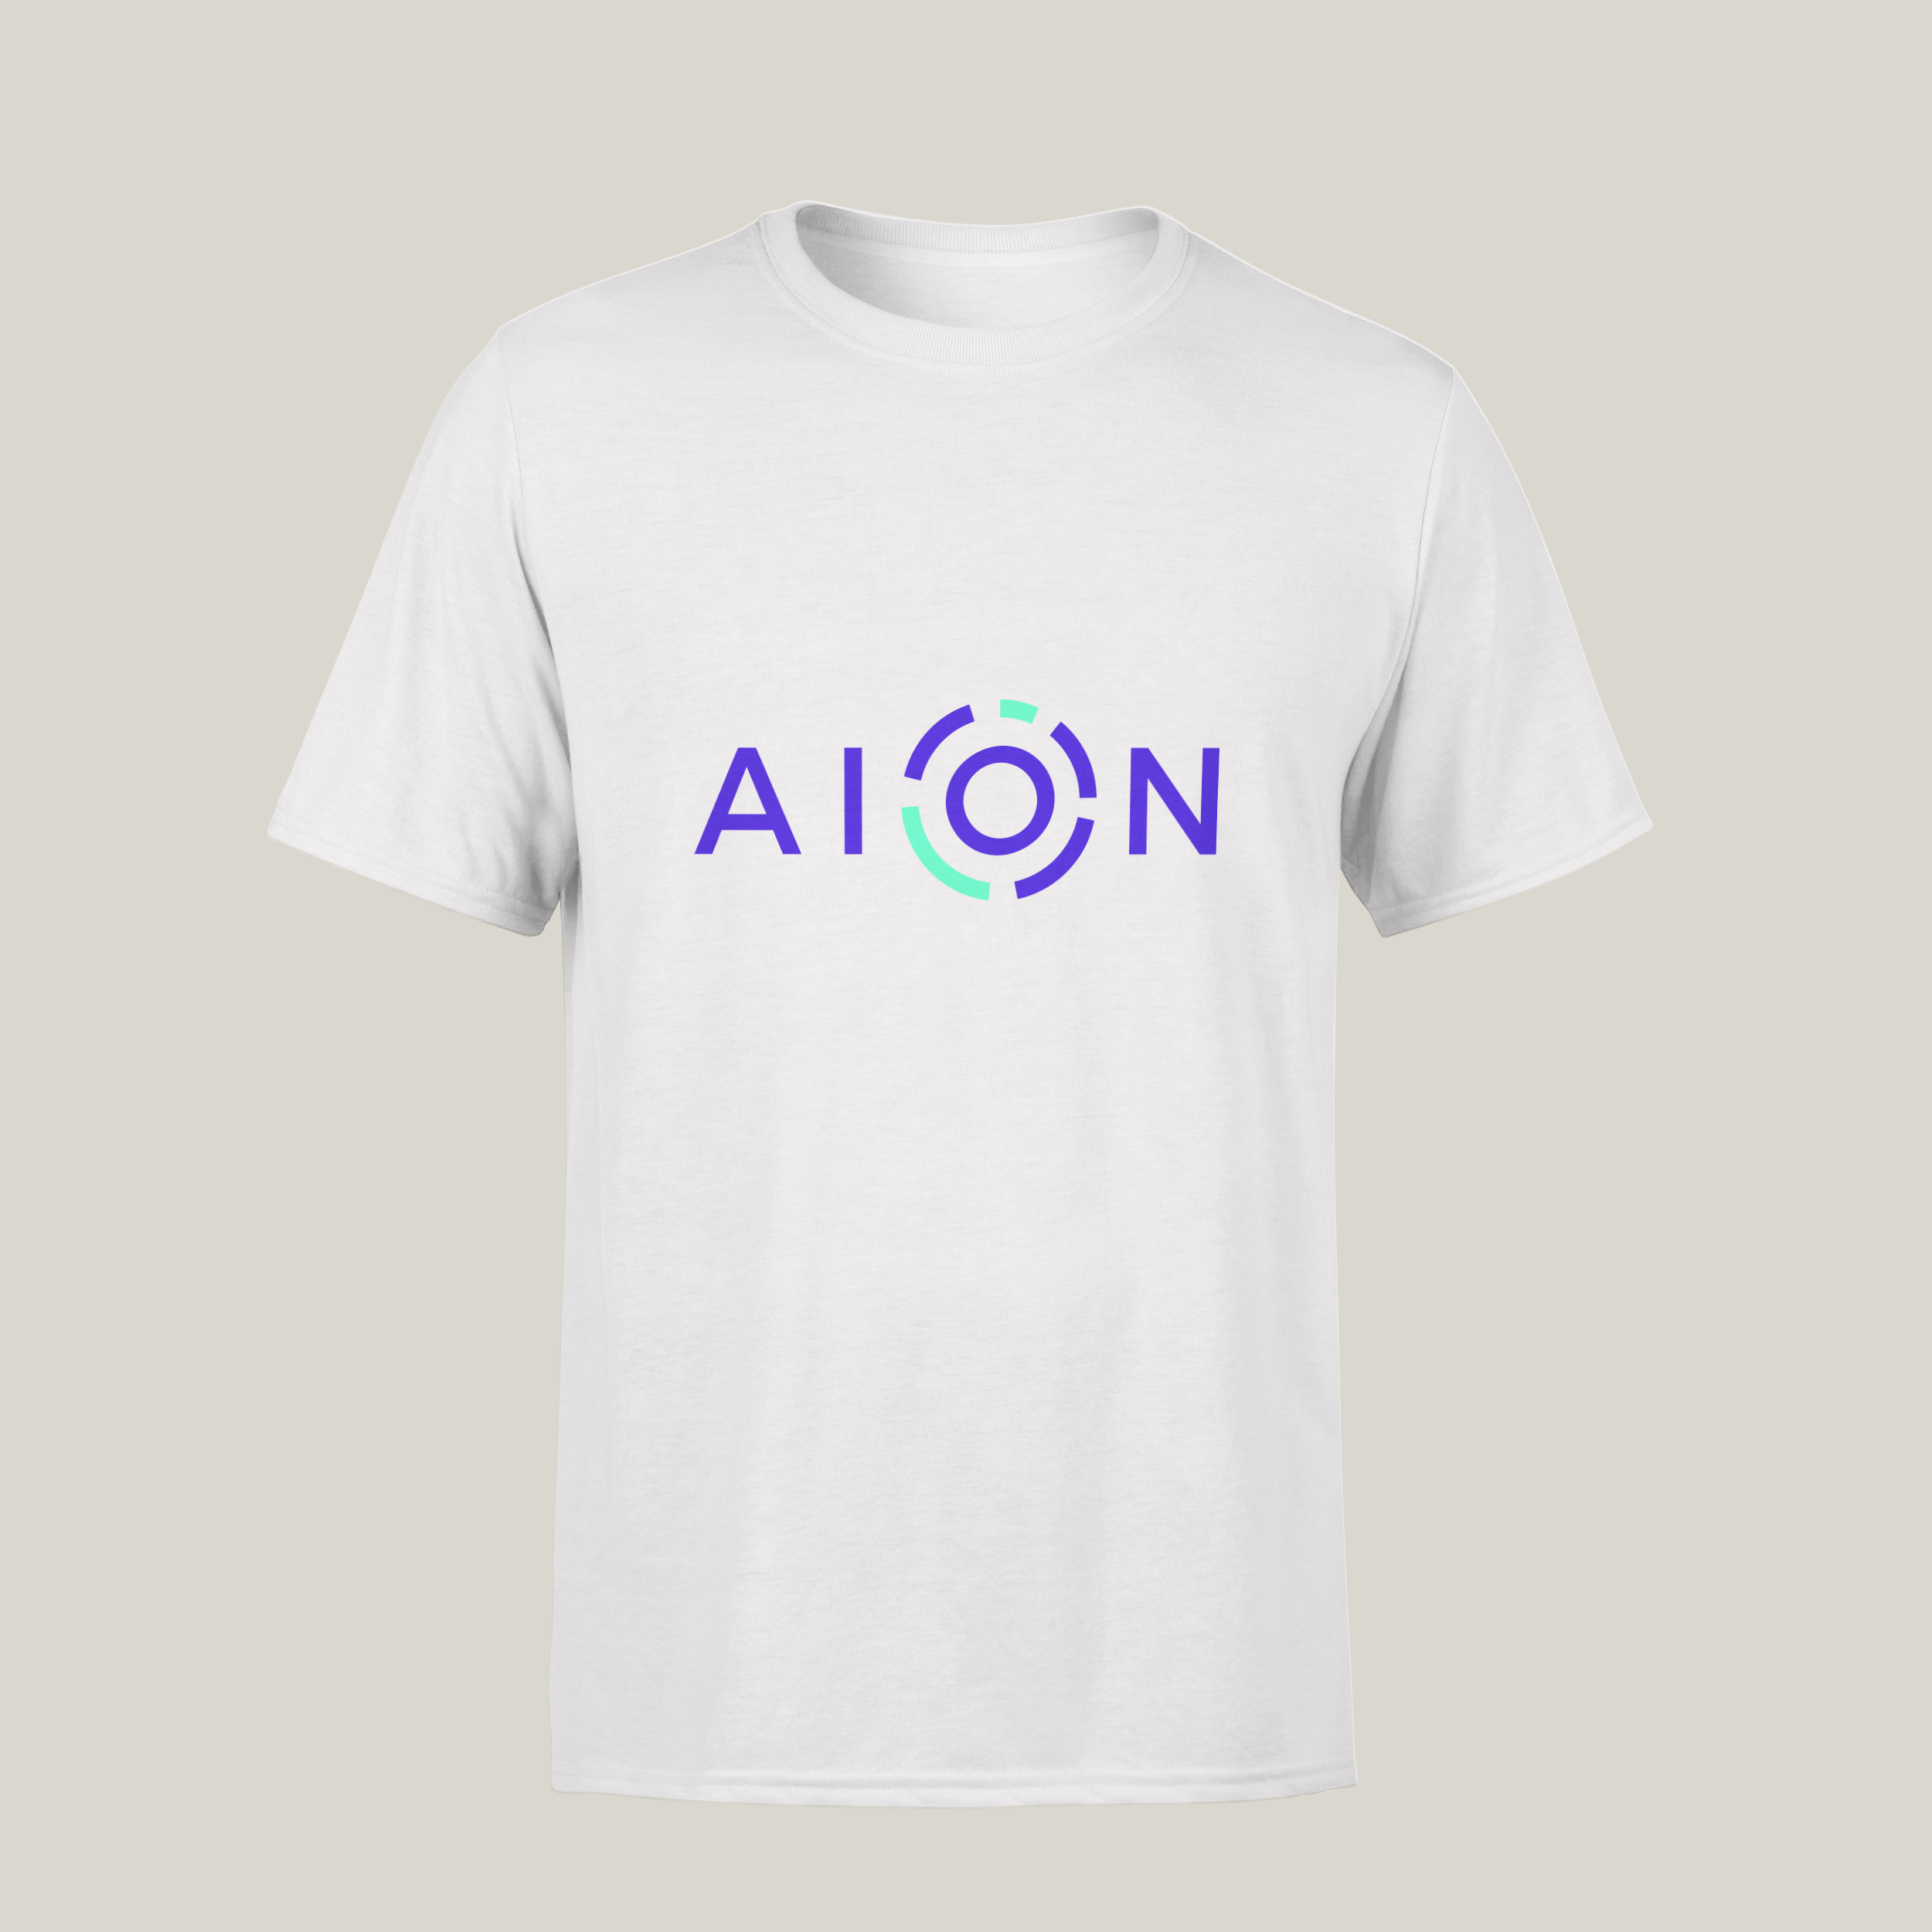 Aion Logo - AION Logo T Shirt. Cryptocurrency Merch & Clothing